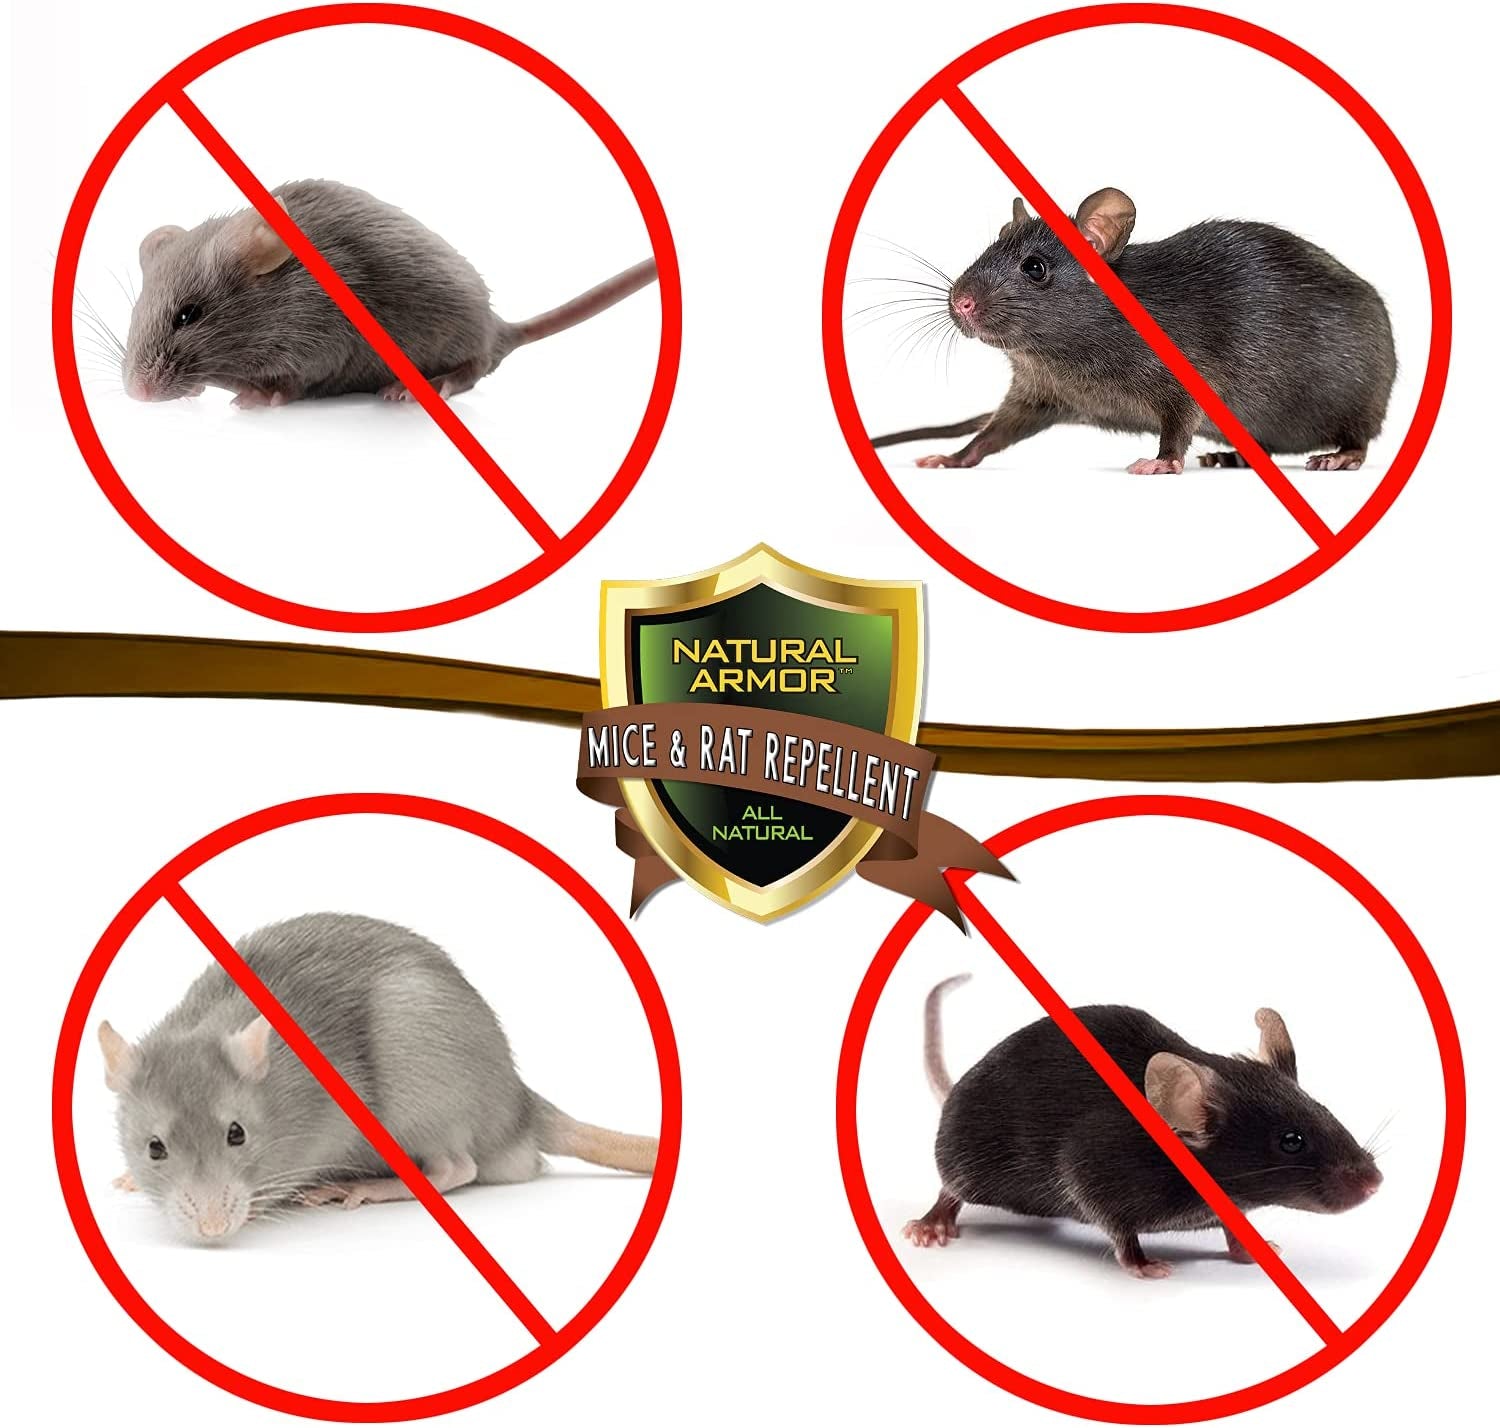 Natural Armor, Mice & Rat Repellent. Peppermint Repellent for Mice/Mouse, Rats & Rodents. Natural Spray for Indoor & Outdoor Use. 128 OZ Gallon Refill Ready to Use